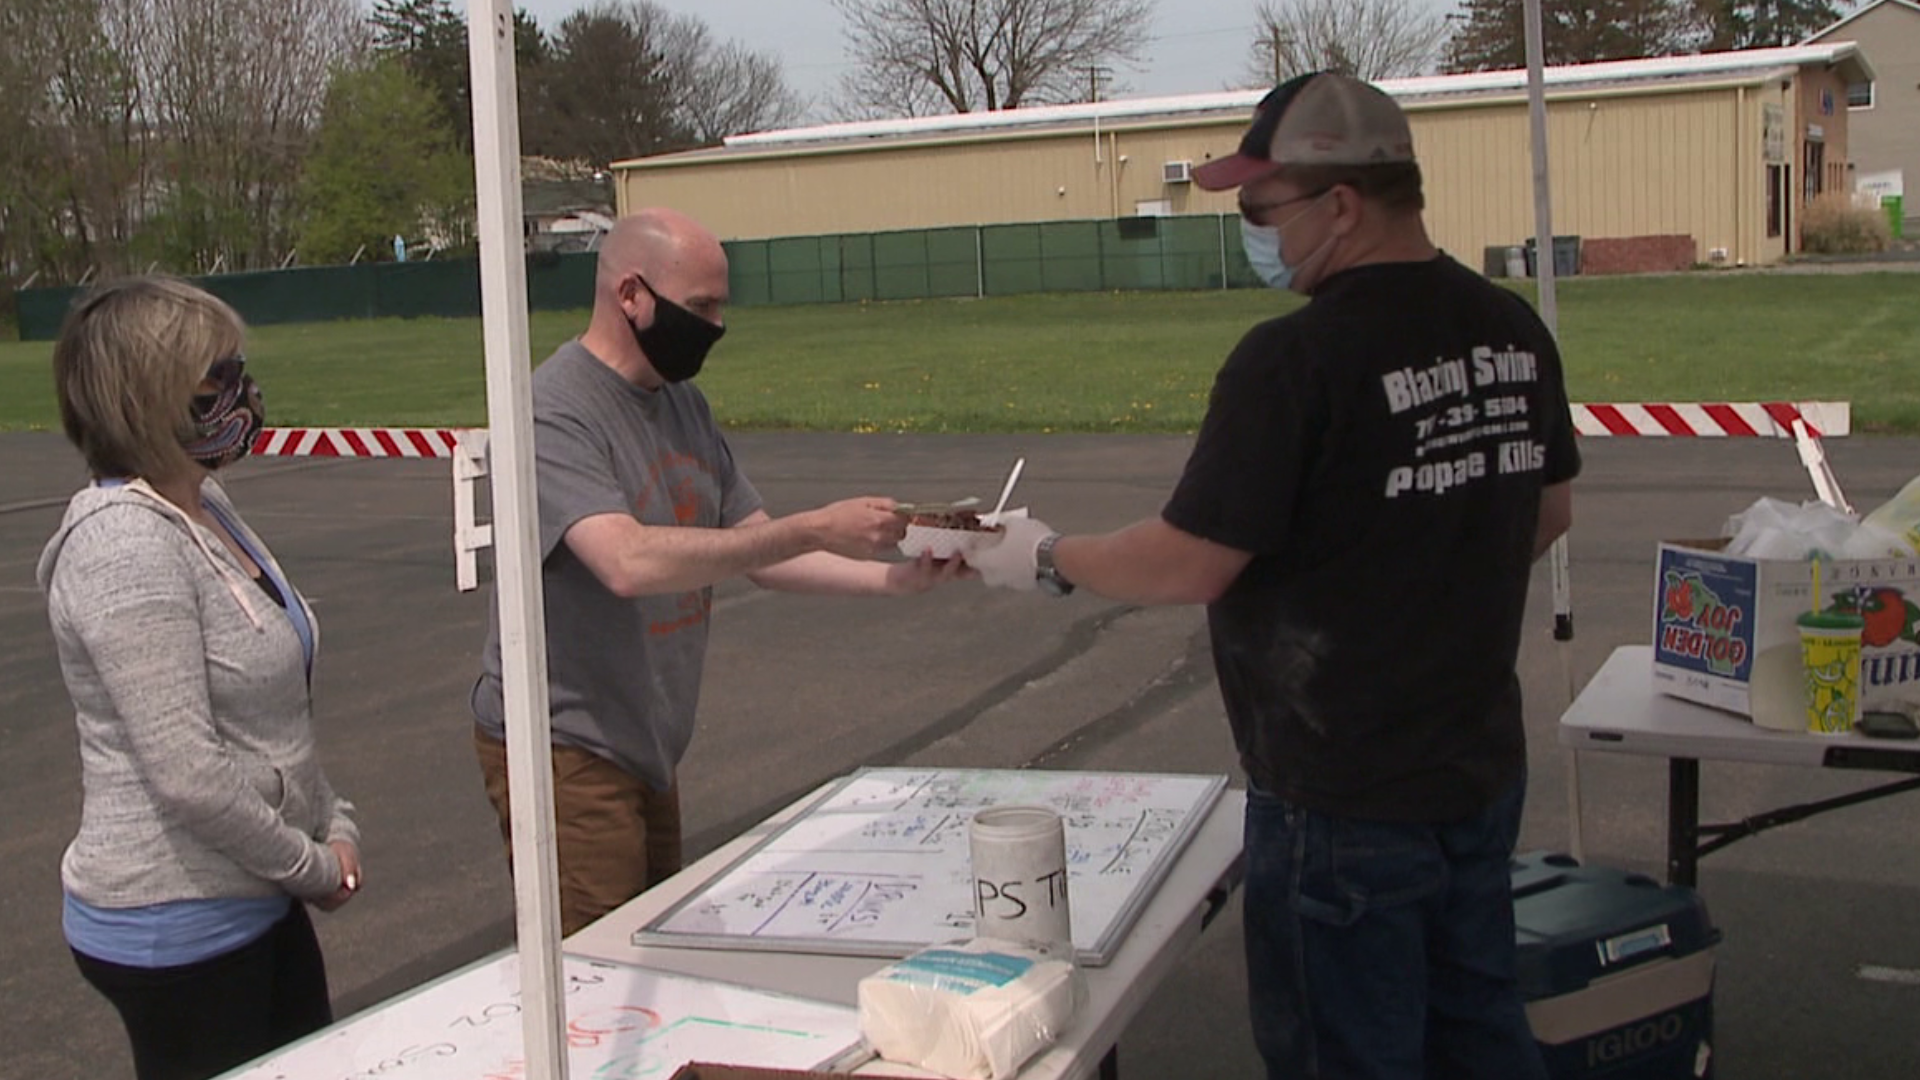 The firefighters invited several small businesses to bring their food trucks and serve up lunch to the community.